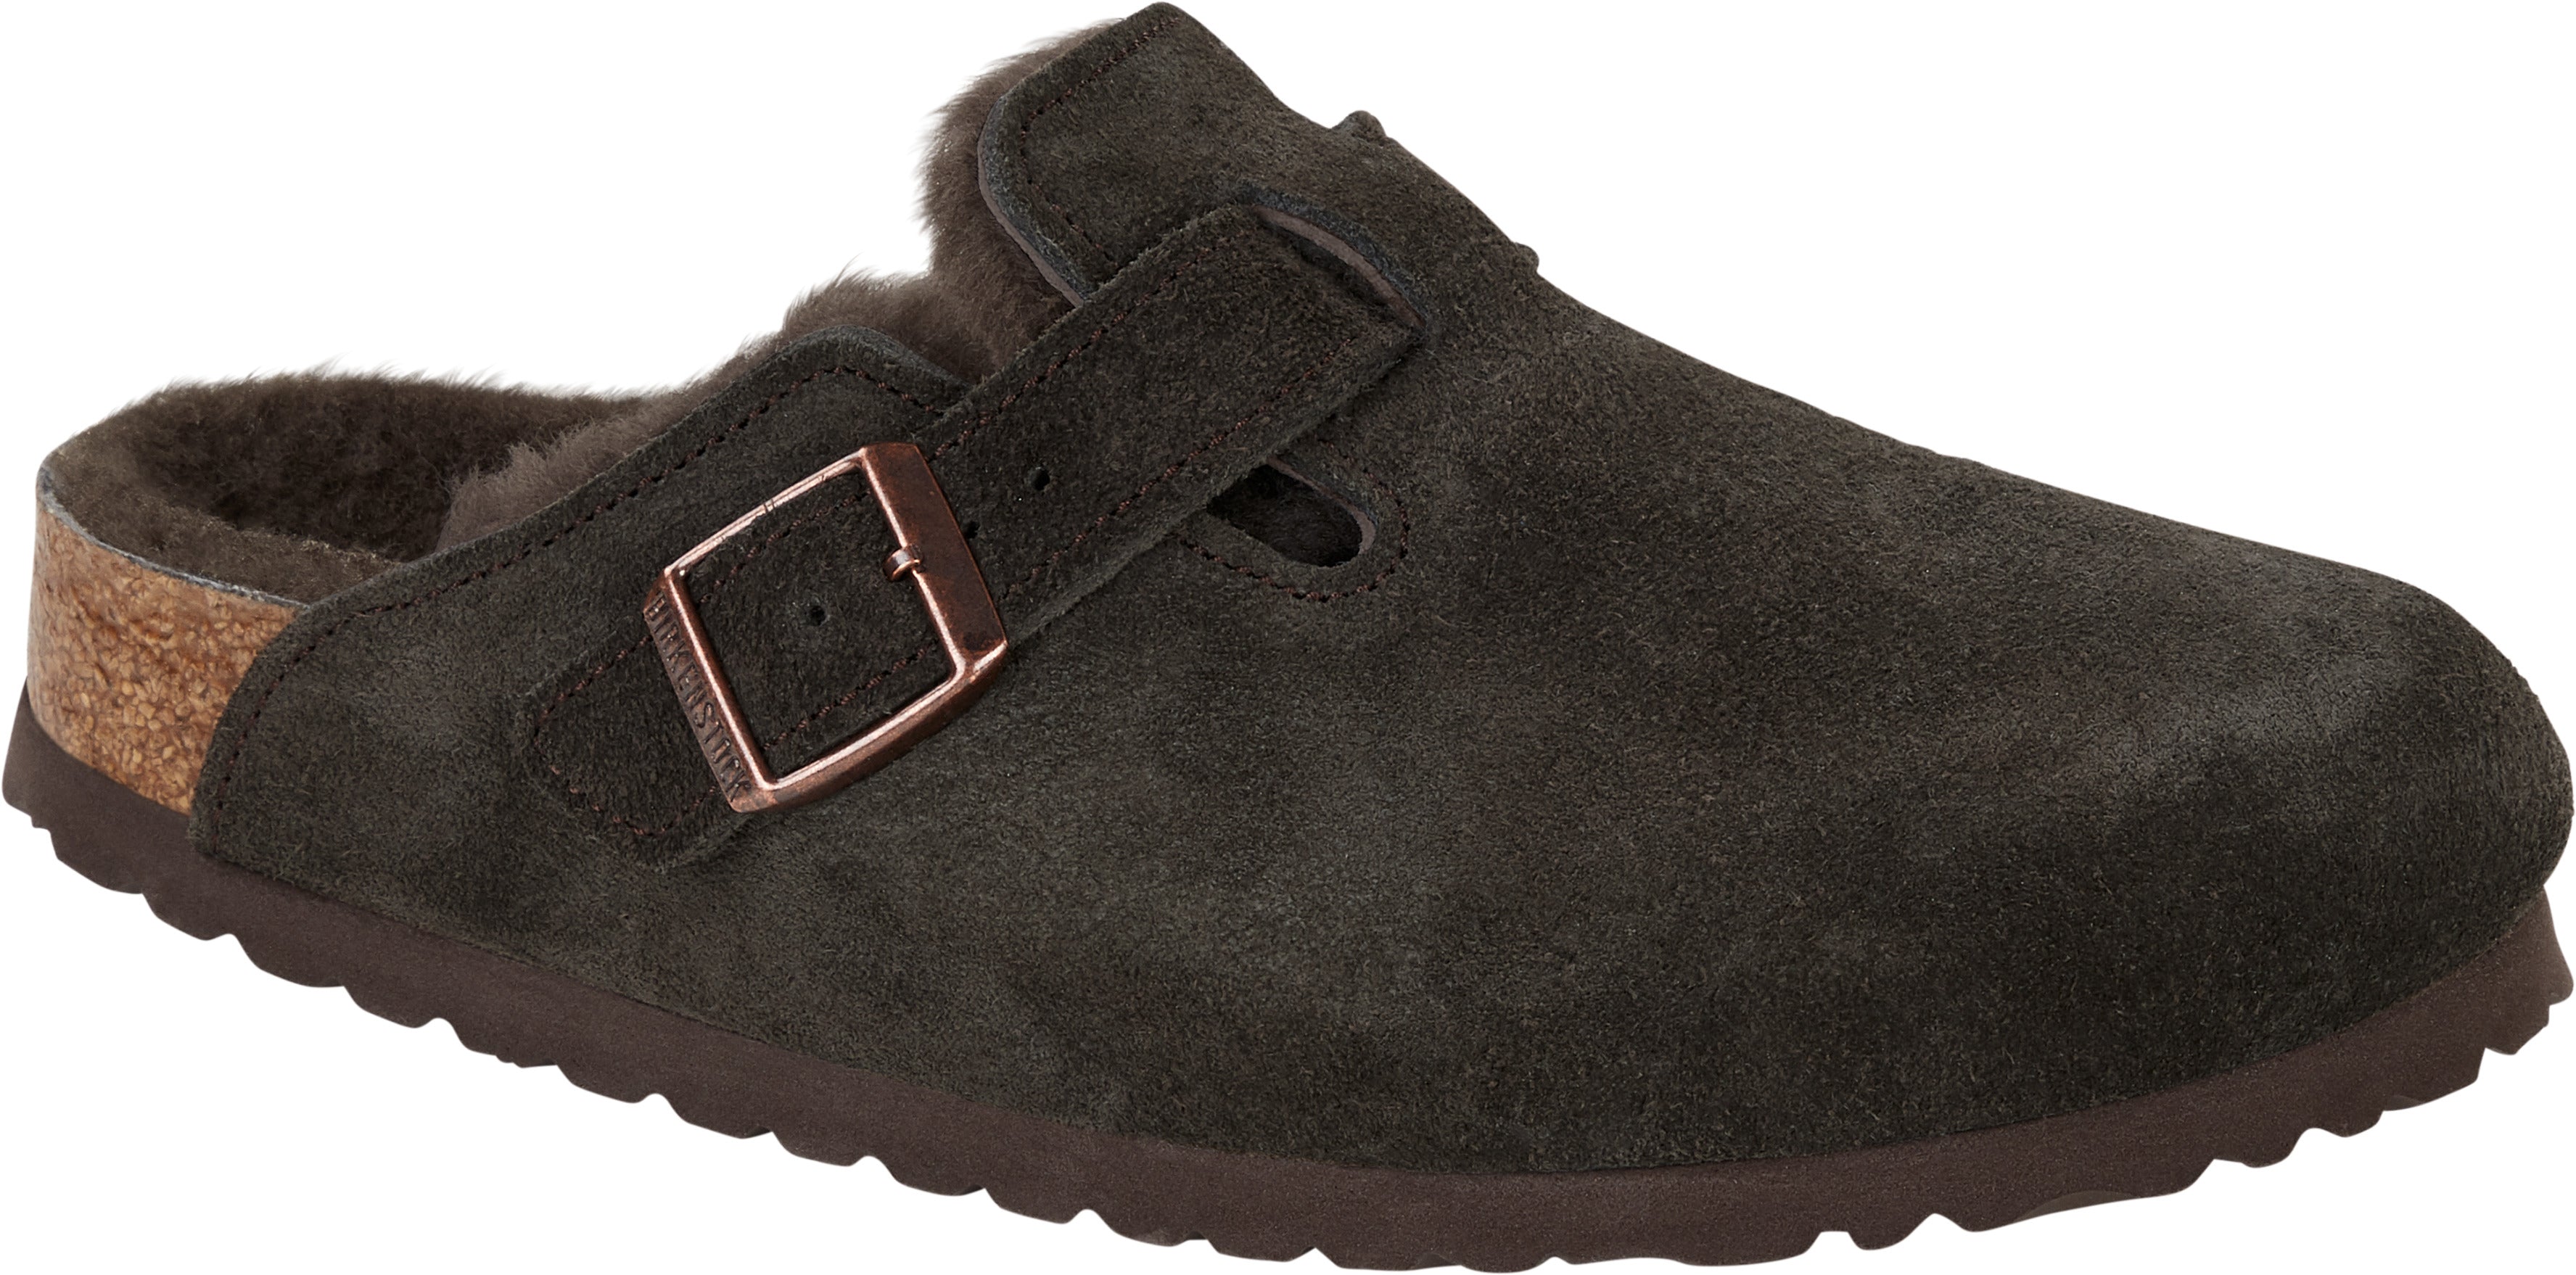 Birkenstock 1020567 Boston Shearling Mocca Clogs/Slippers – The Shoe Parlour